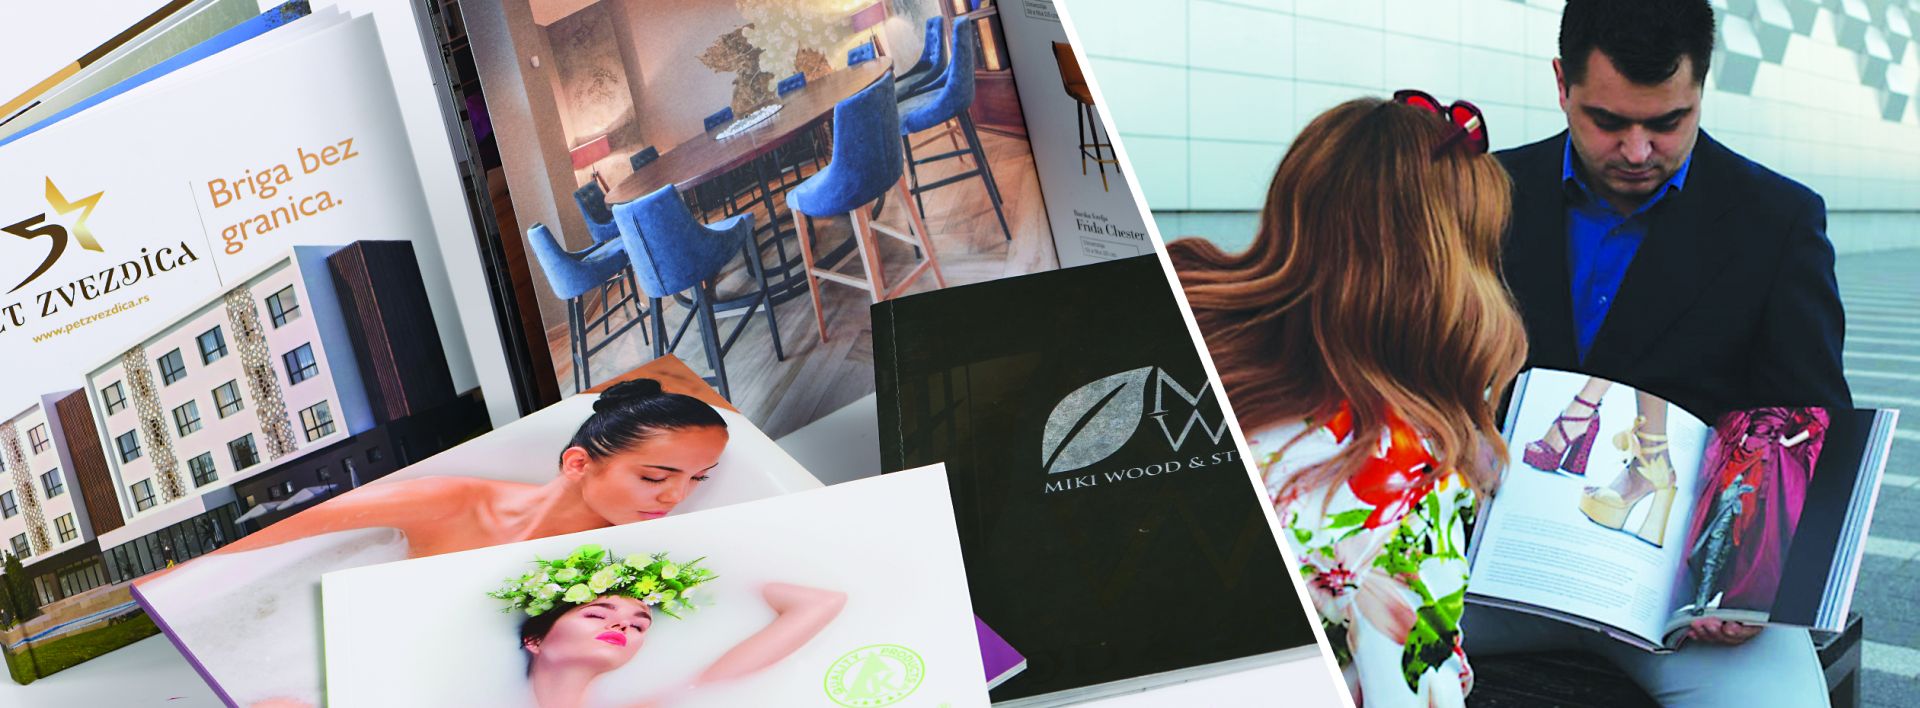 Promotional materials and magazines